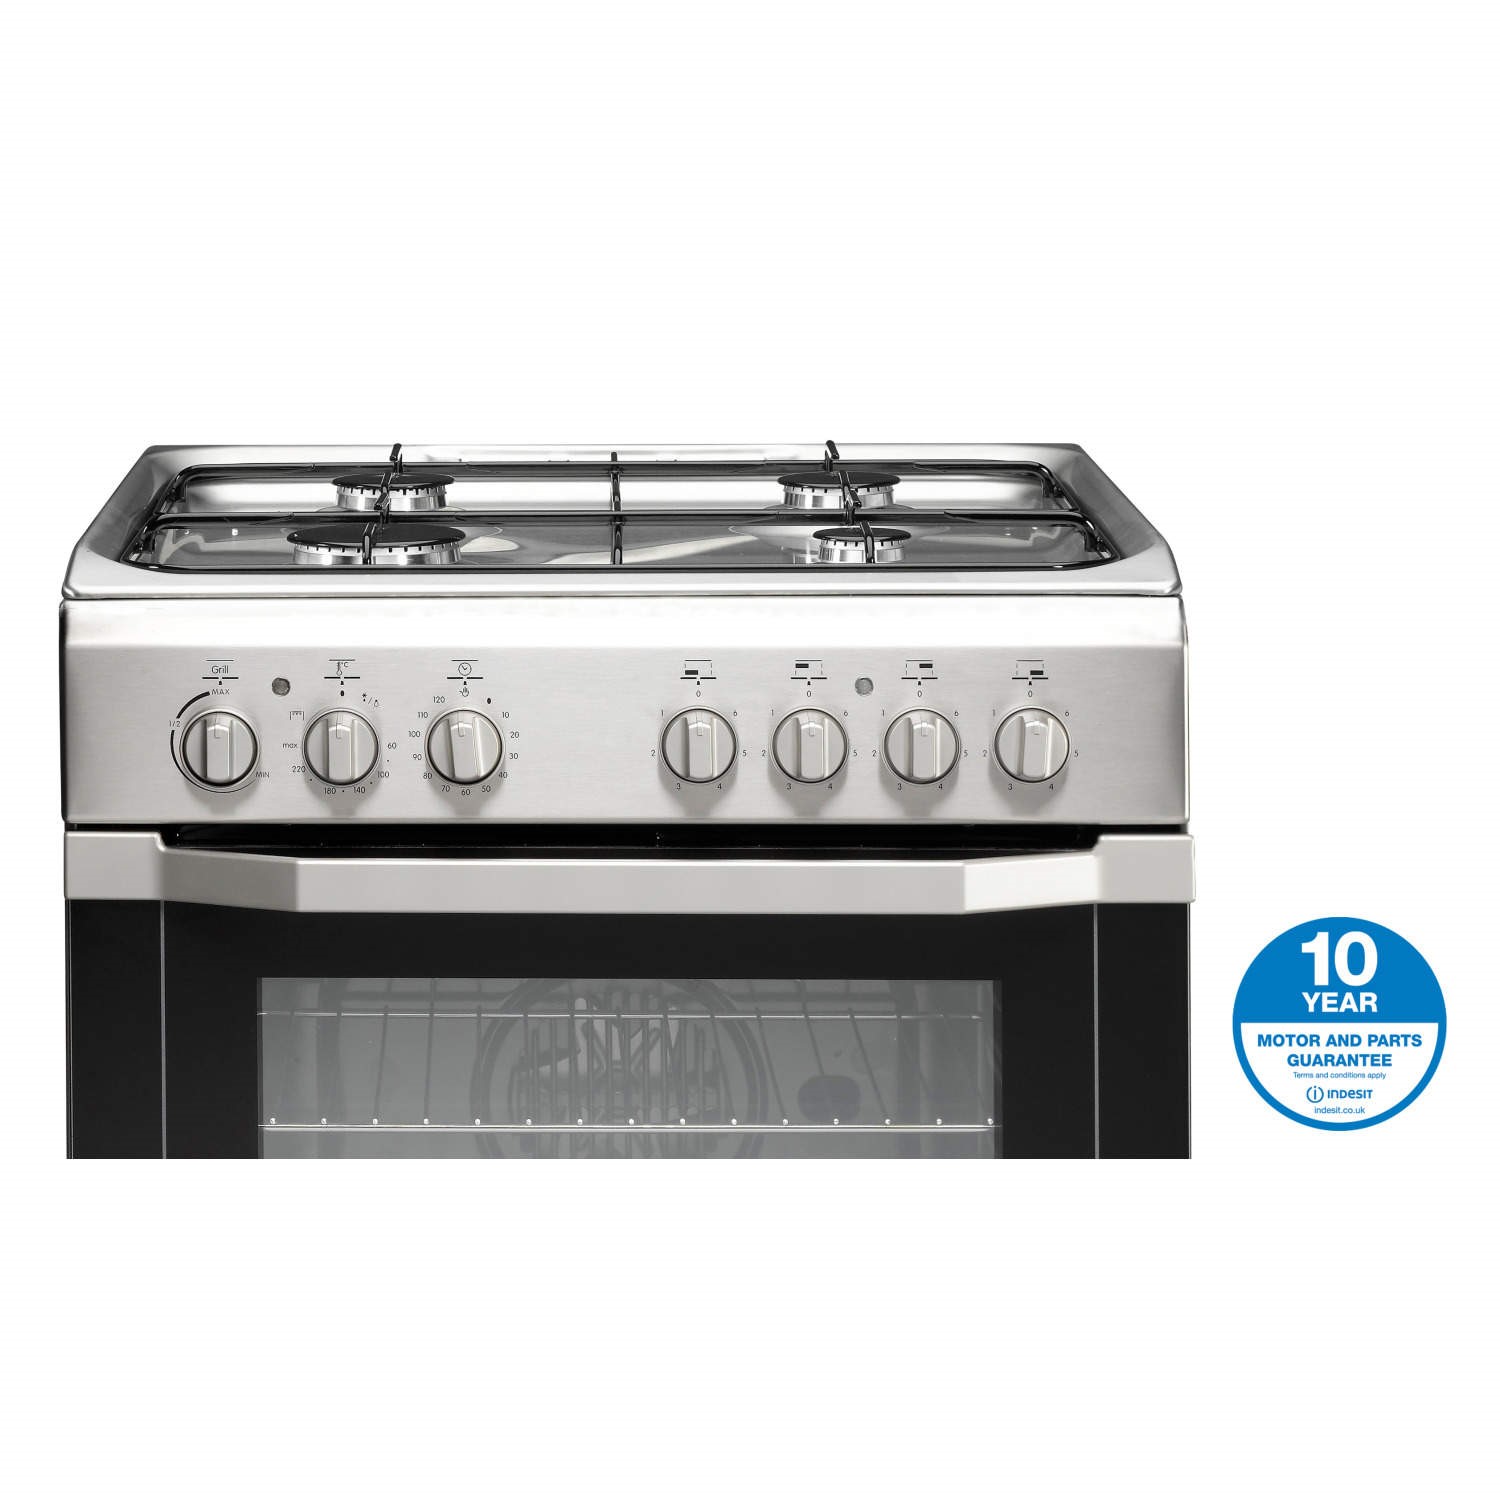 Stainless Steel INDESIT I6G52X 60cm Single Oven Dual Fuel Cooker 